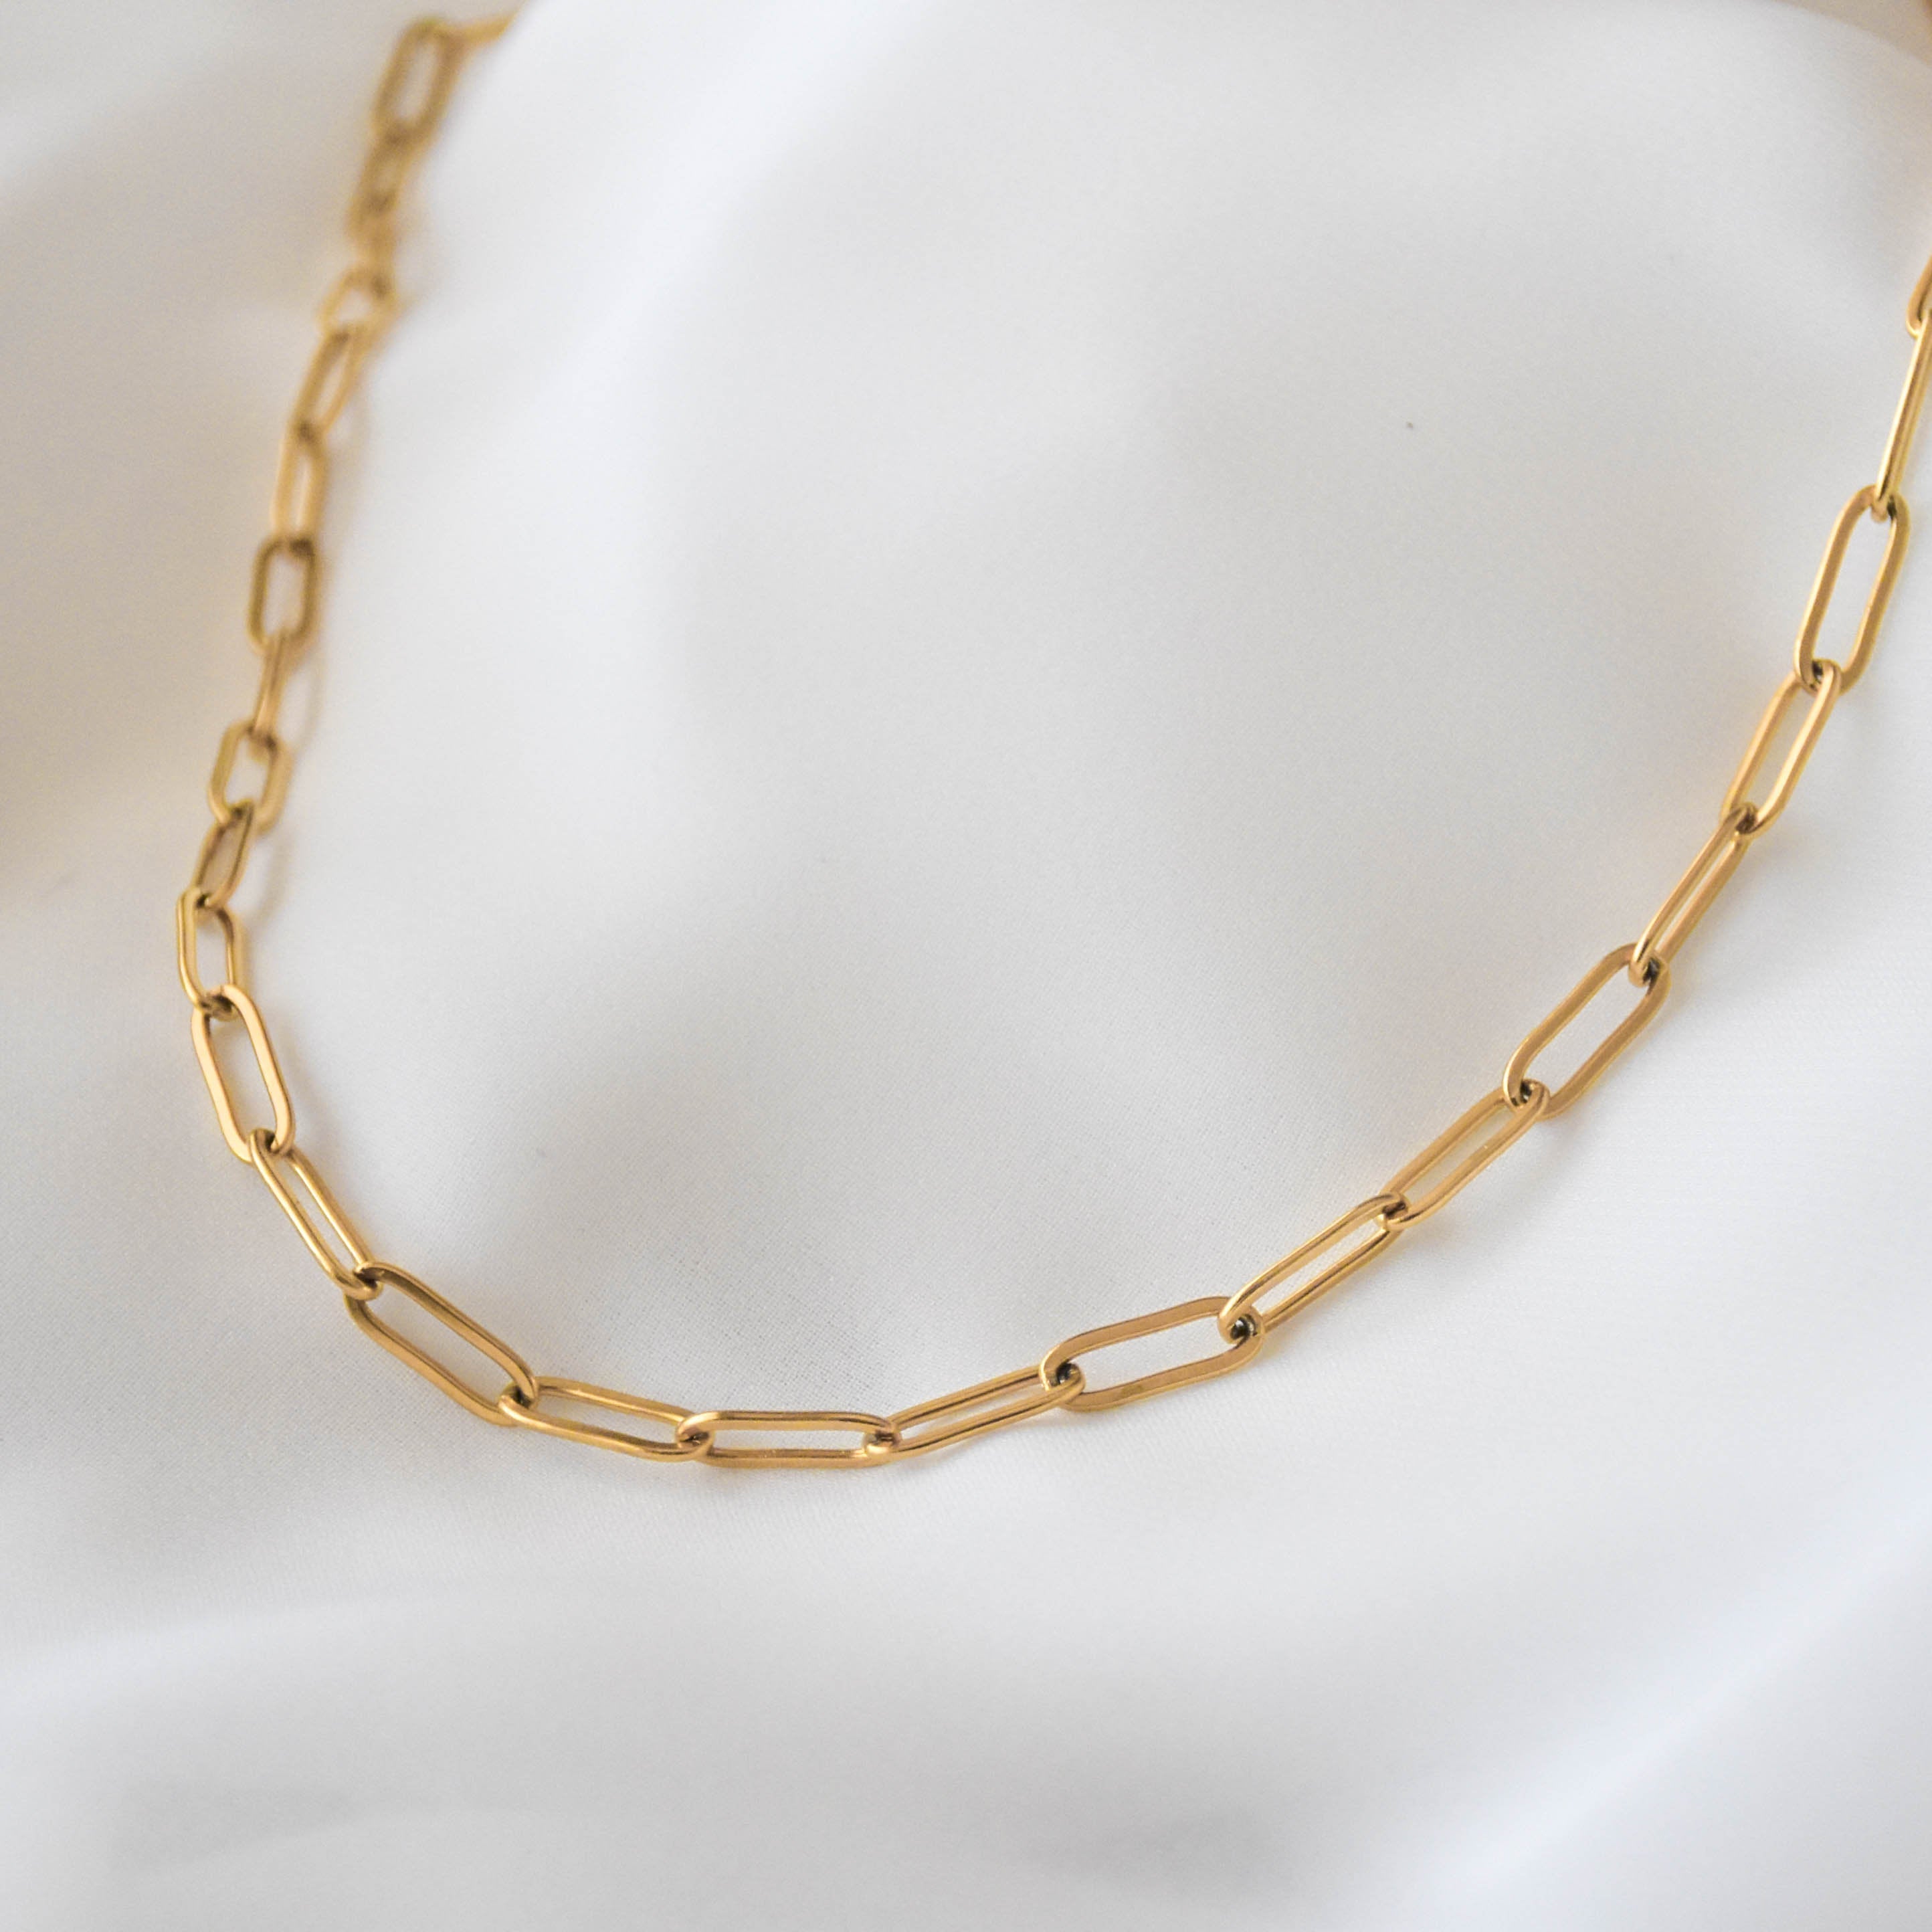 Paperclip Necklace - Link Chain Necklace, paperclip chain necklace, gold paperclip necklace, long link necklace |GPN00035